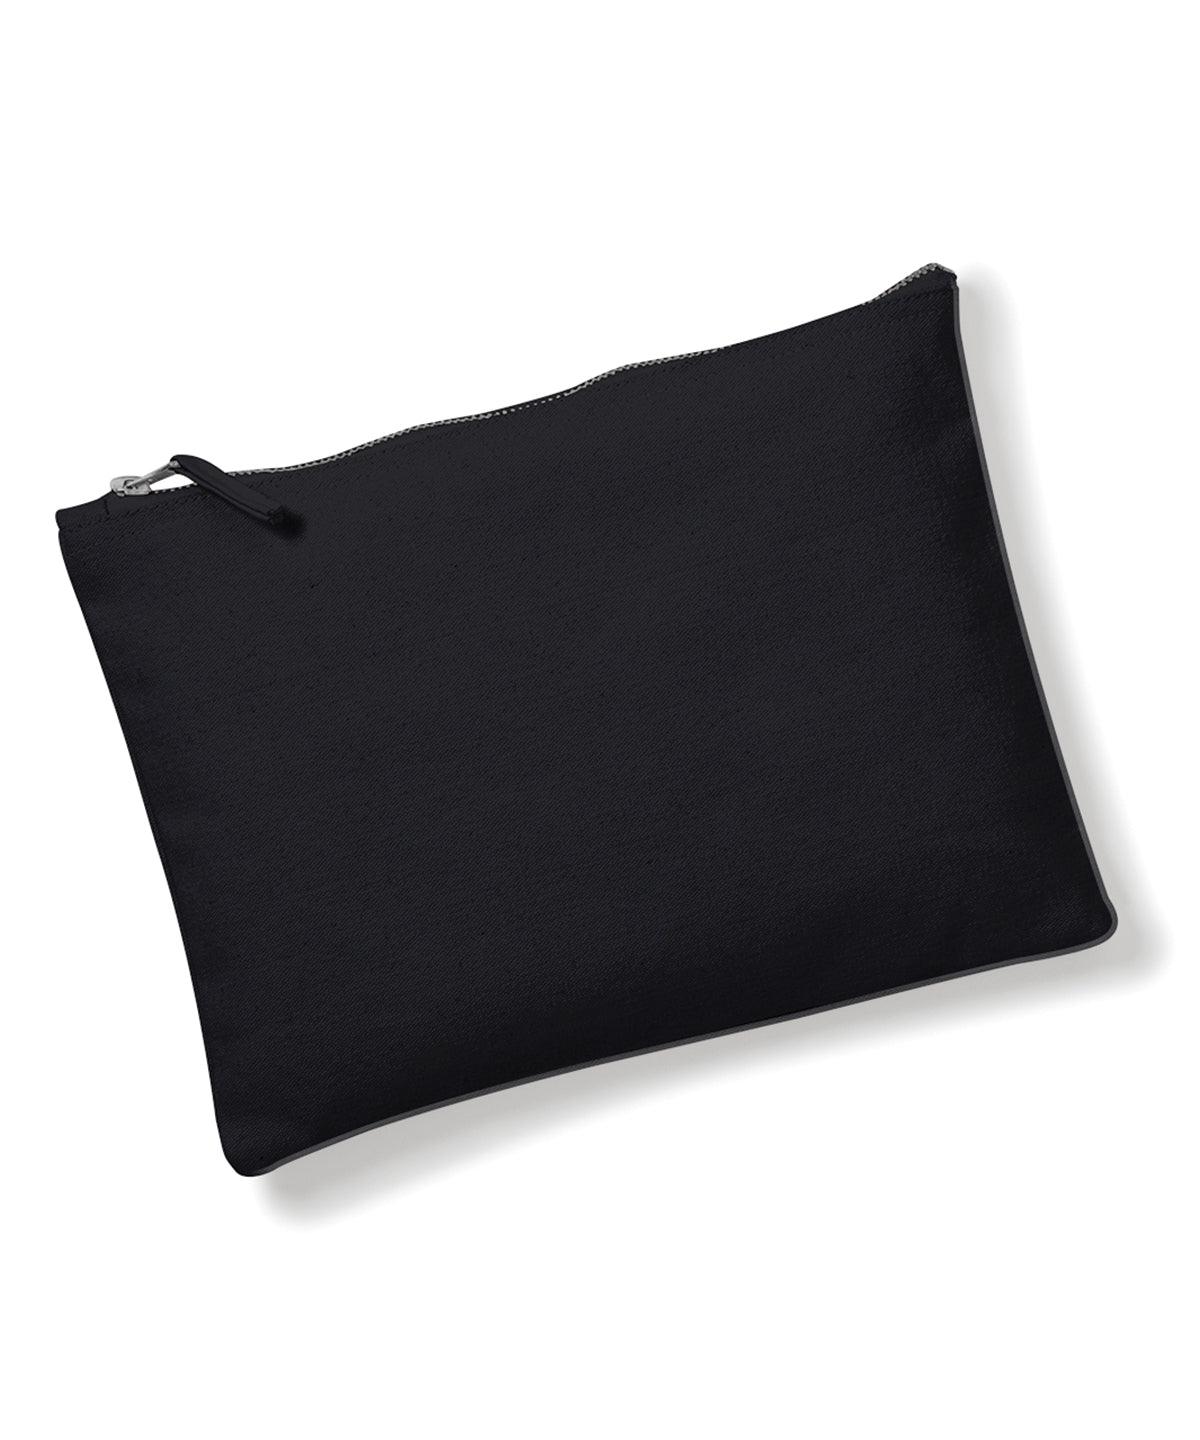 Black - Canvas accessory pouch Bags Westford Mill Bags & Luggage, Must Haves Schoolwear Centres